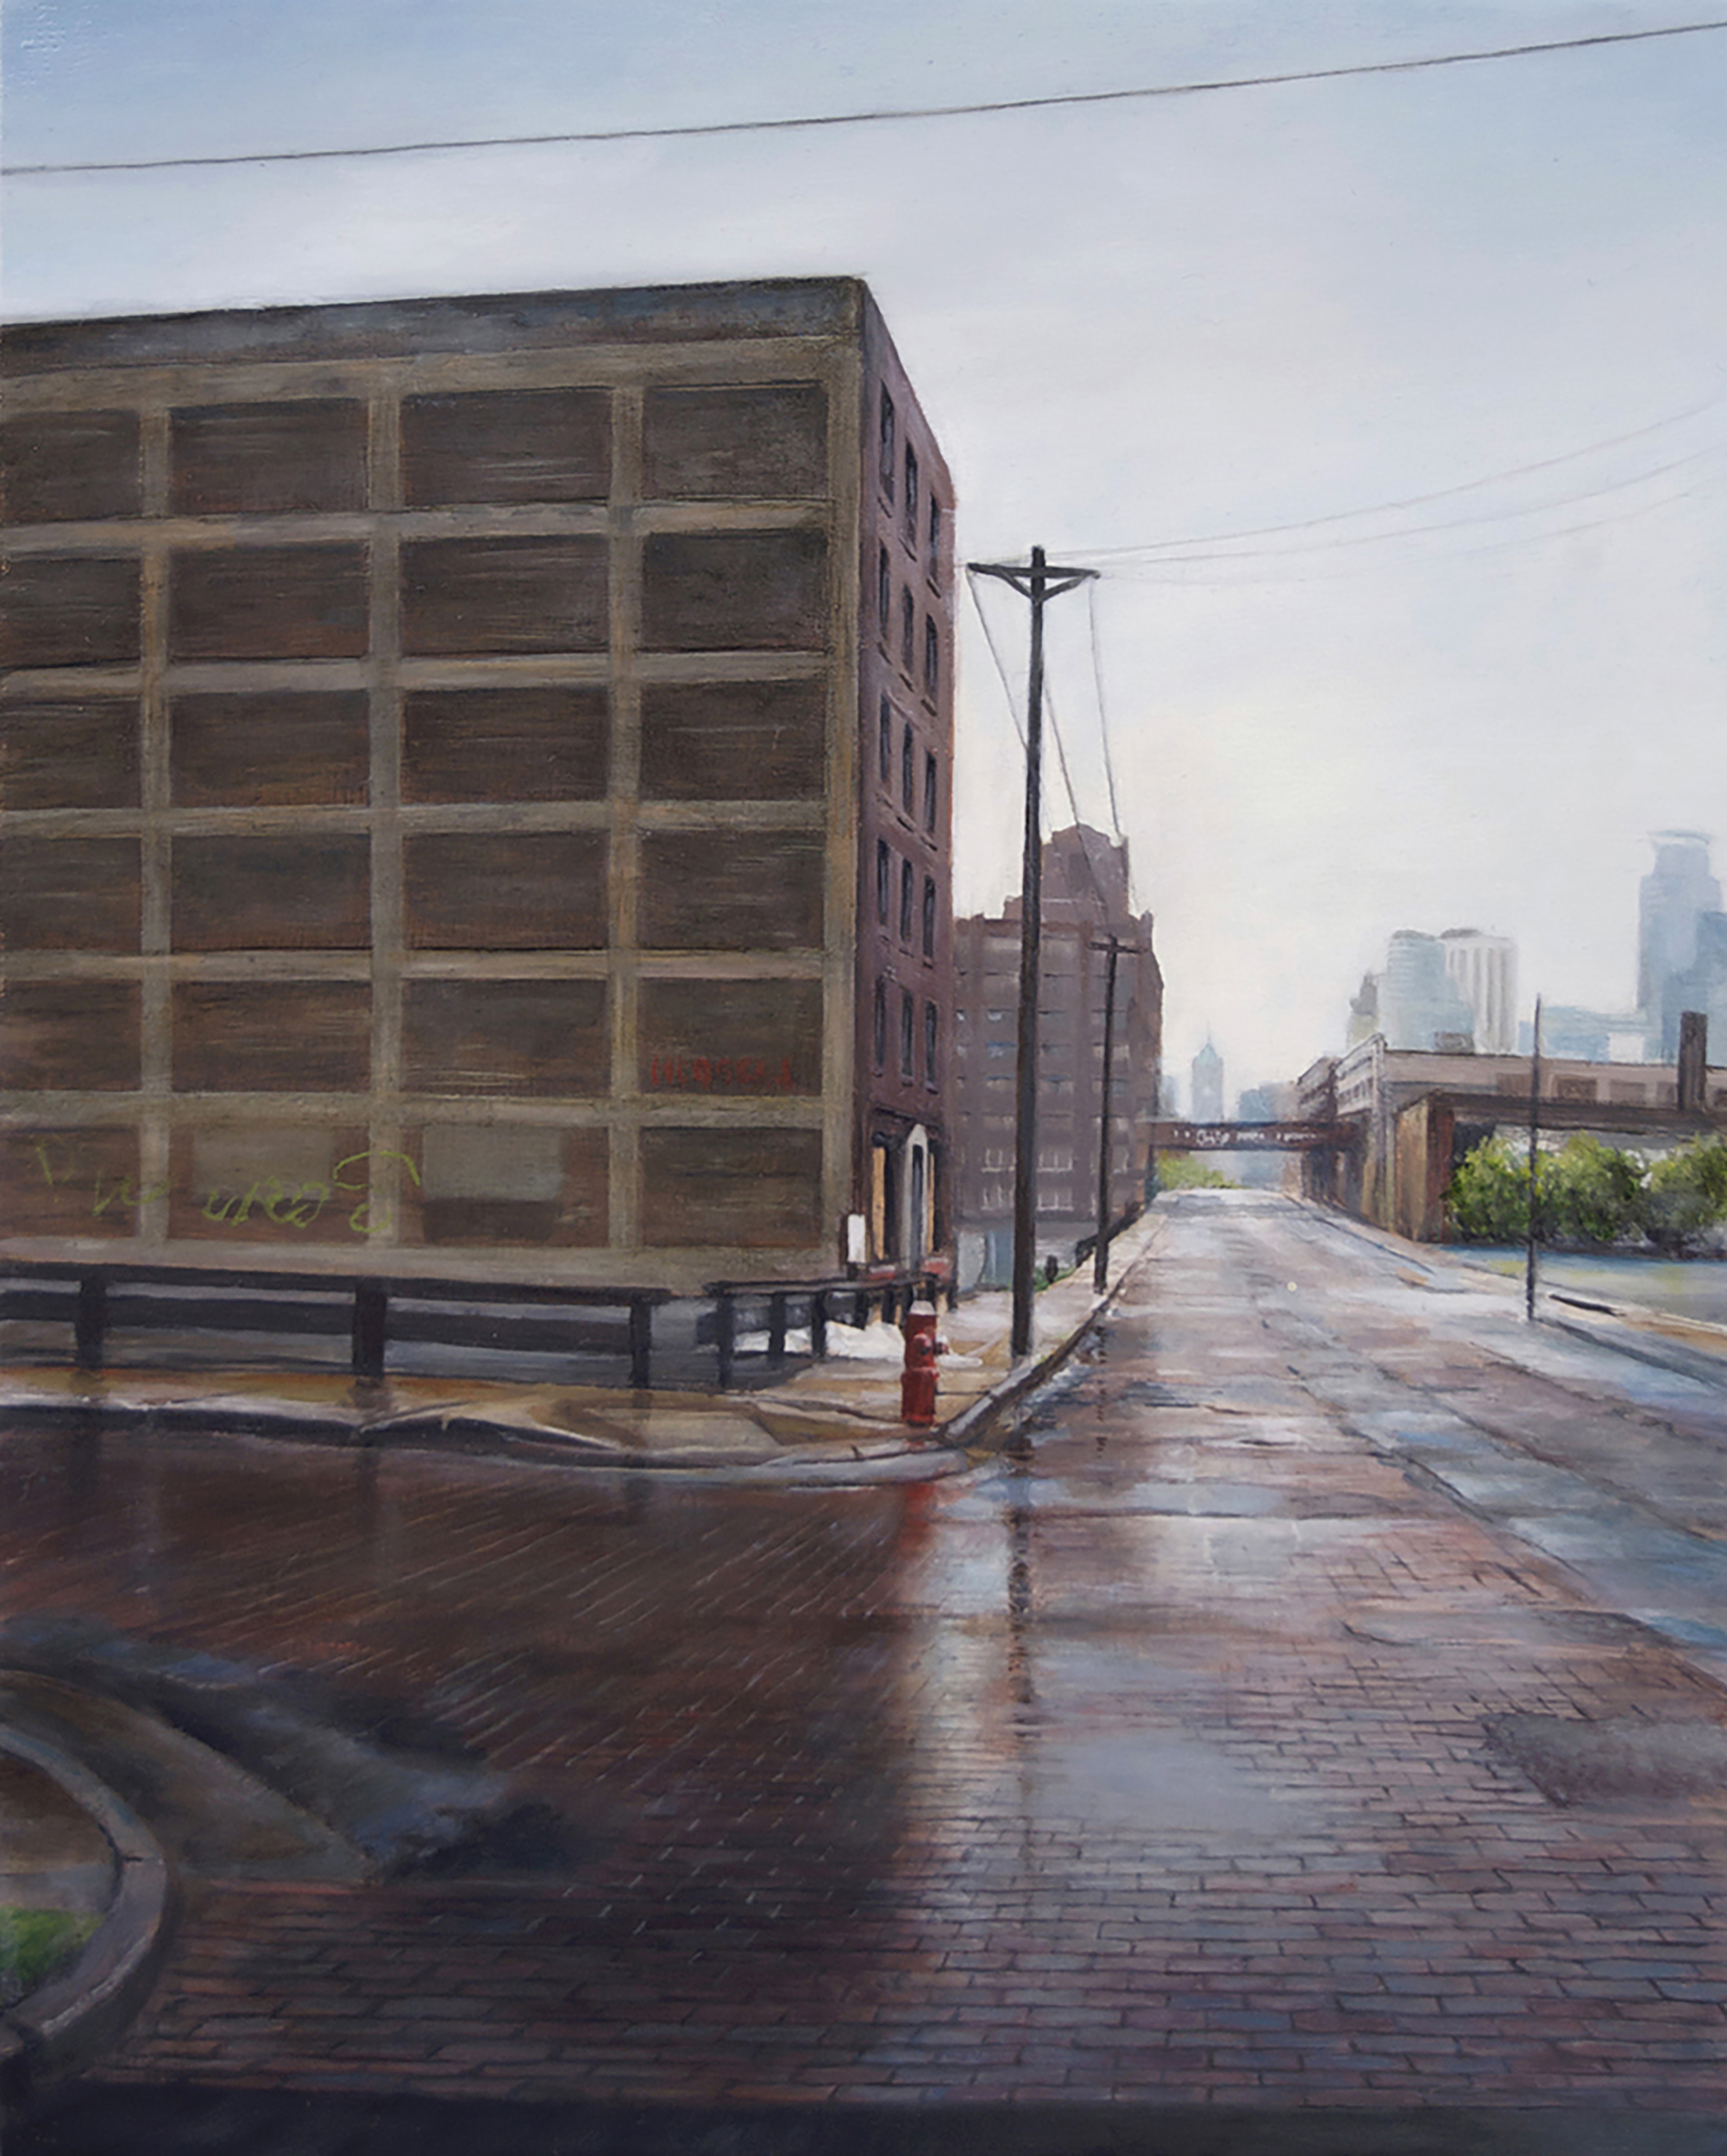   North 3rd Street at North 8th     Avenue, Minneapolis   2014  Oil on panel  10 x 8 inches    